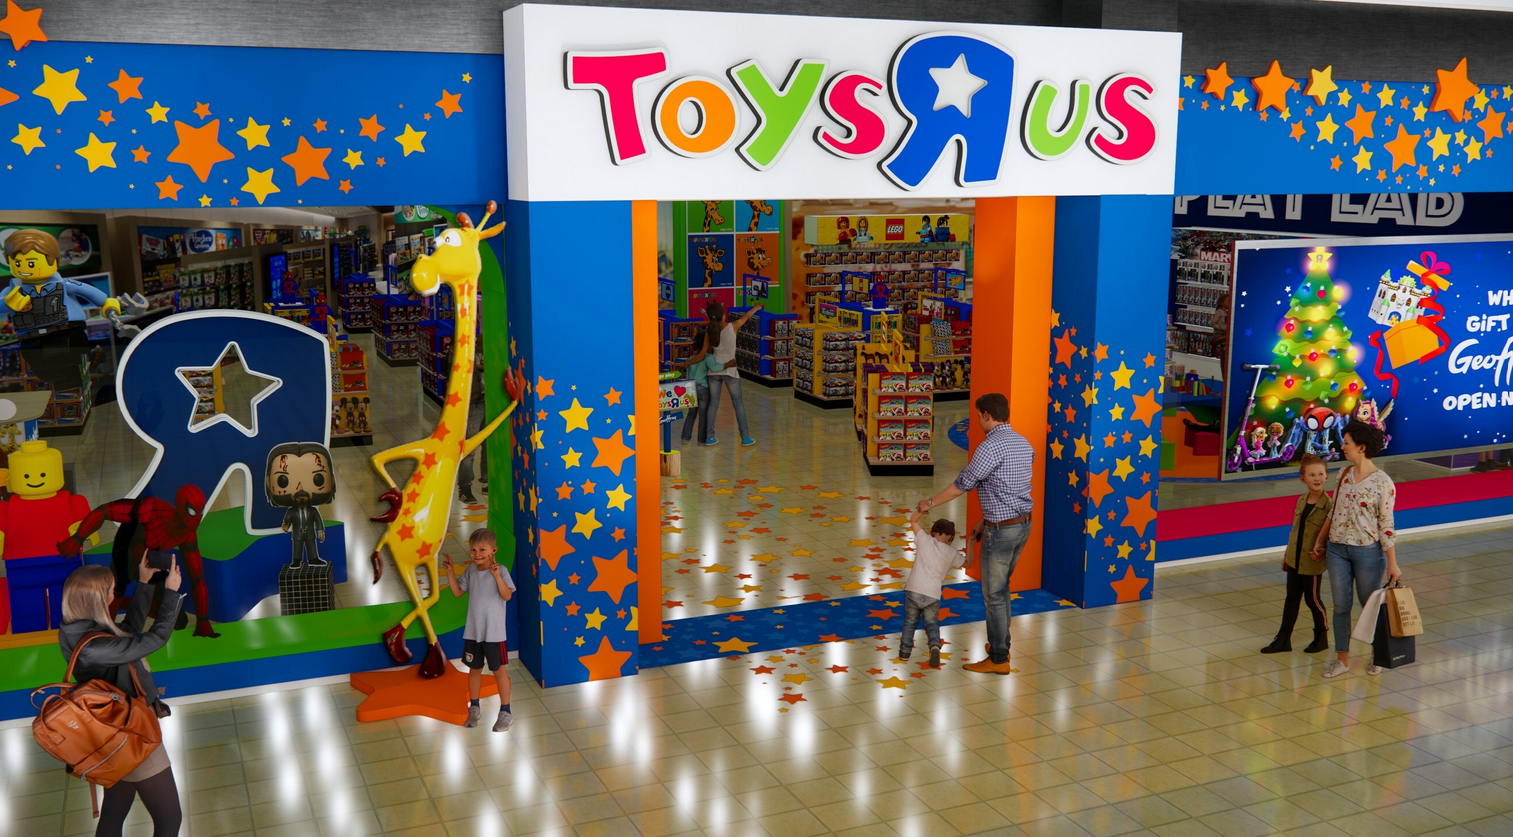 Macy's brings back Toys 'R' Us in time for the holidays - ABC News